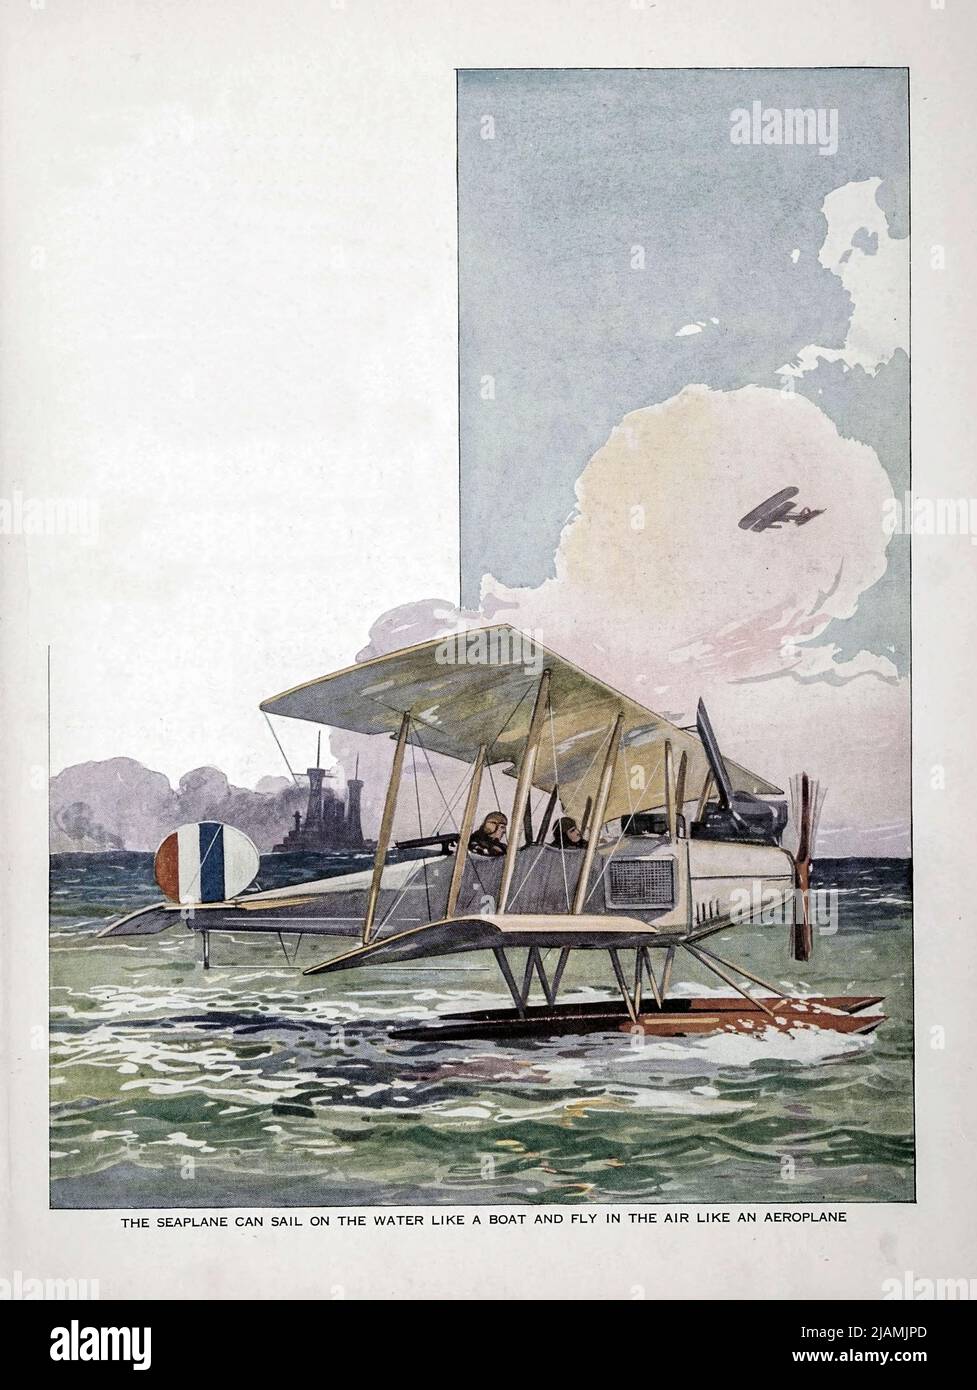 THE SEAPLANE CAN SAIL ON THE WATER LIKE A BOAT AND FLY IN THE AIR LIKE AN AEROPLANE From the ' Aviation book ' by Haywood Leslie Davis, Publication date 1918 Publisher New York, McLoughlin brothers, inc. Stock Photo